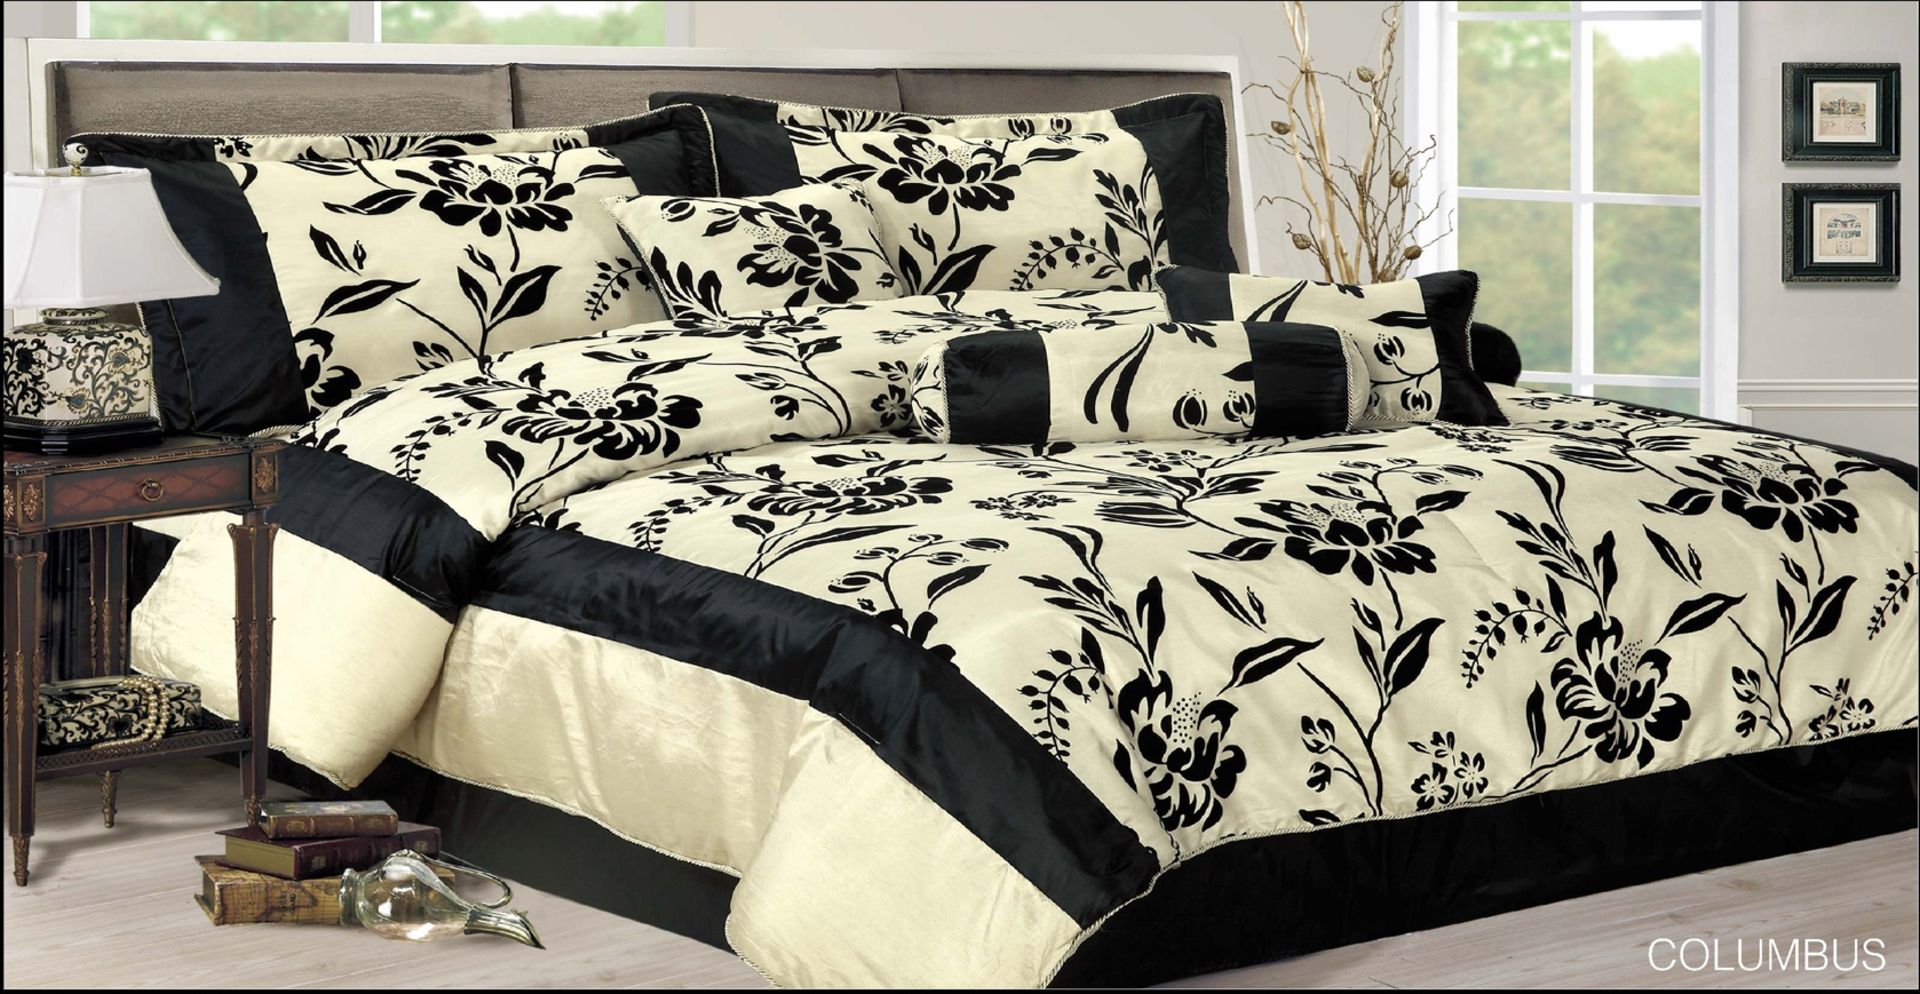 V Brand New King Size 7 Piece Comforter Set Including 1 x Bed Spread,1 x Valance Sheet 2 x Pillow